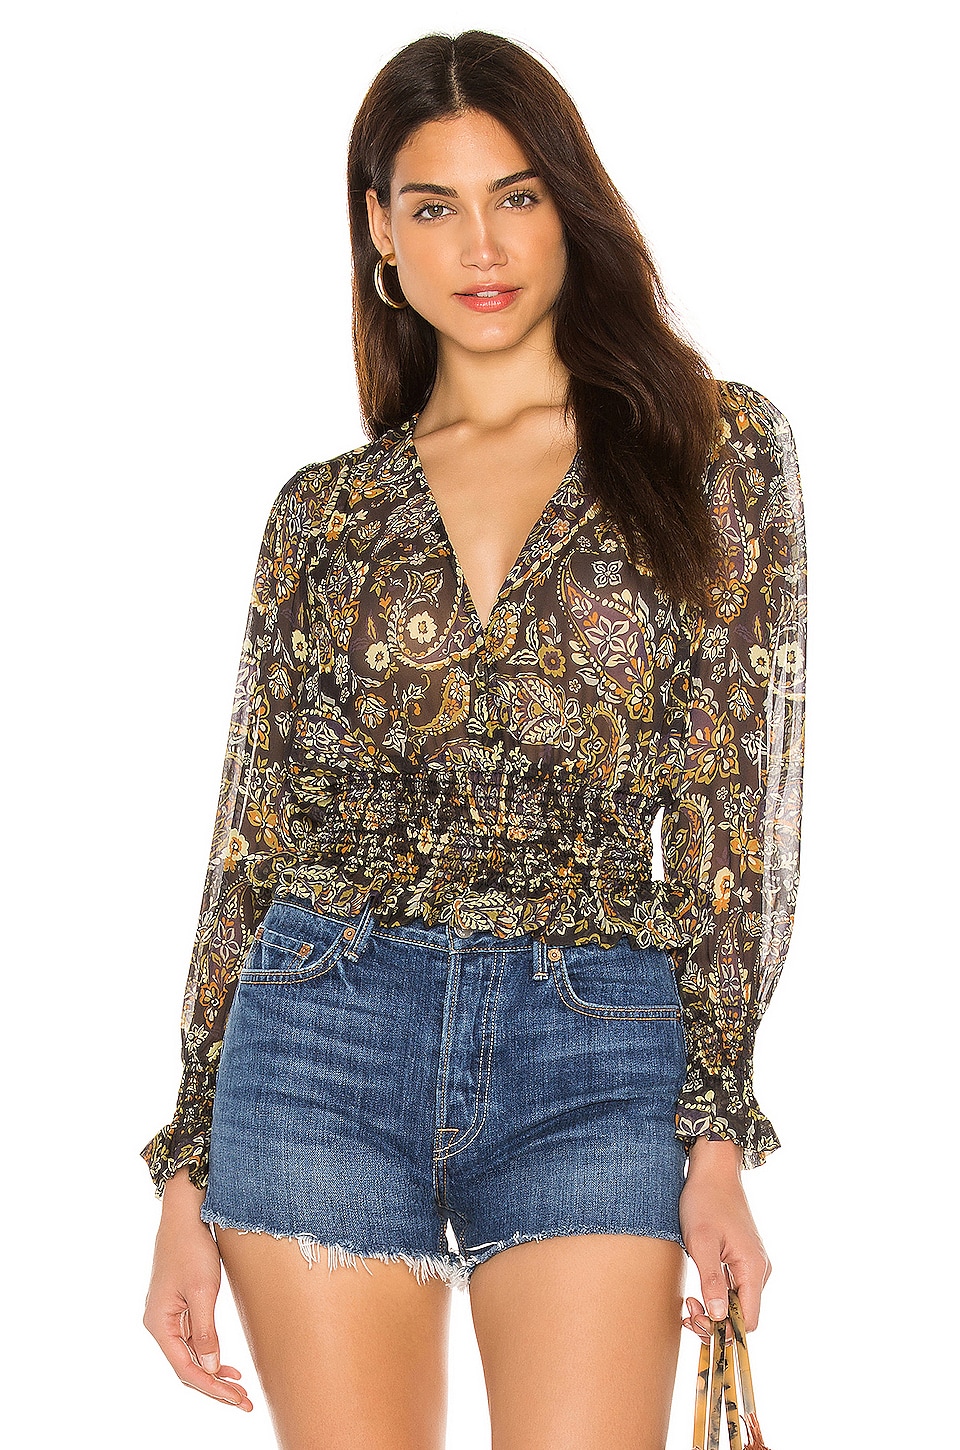 Blue Life Cora Top In Navy Paisley